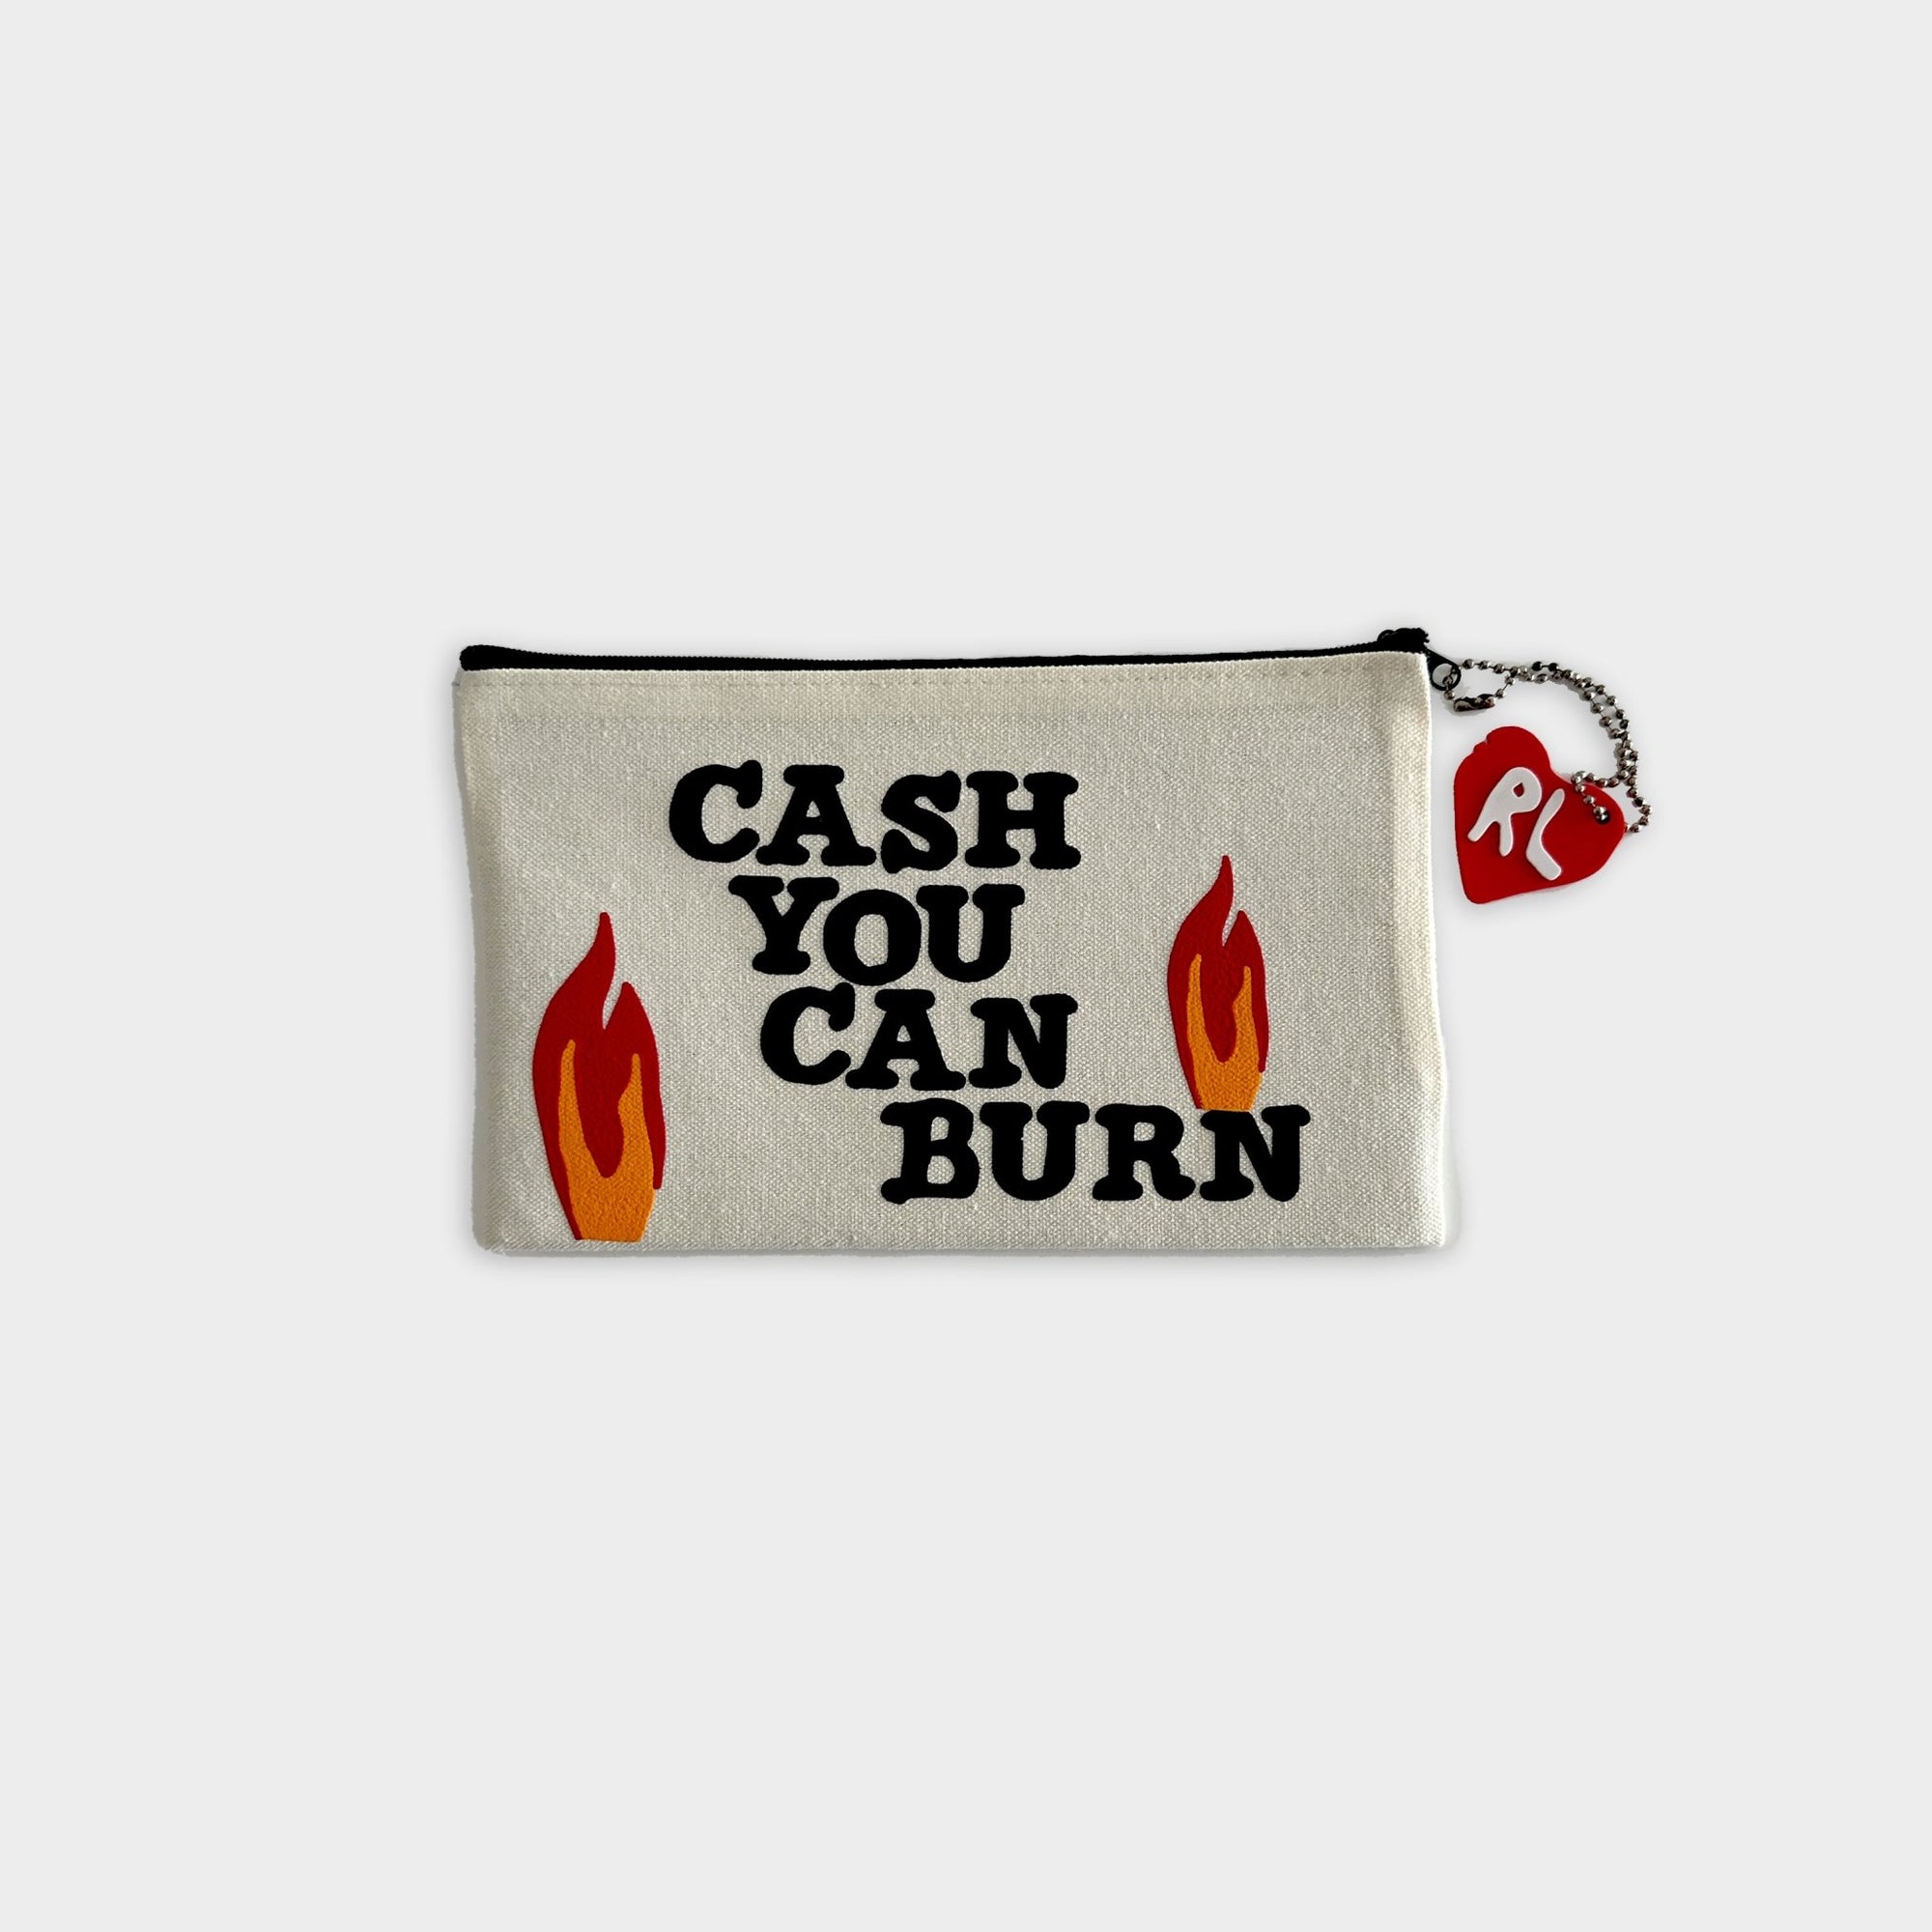 Cash You Can Burn Bank Pouch - RED LETTERS